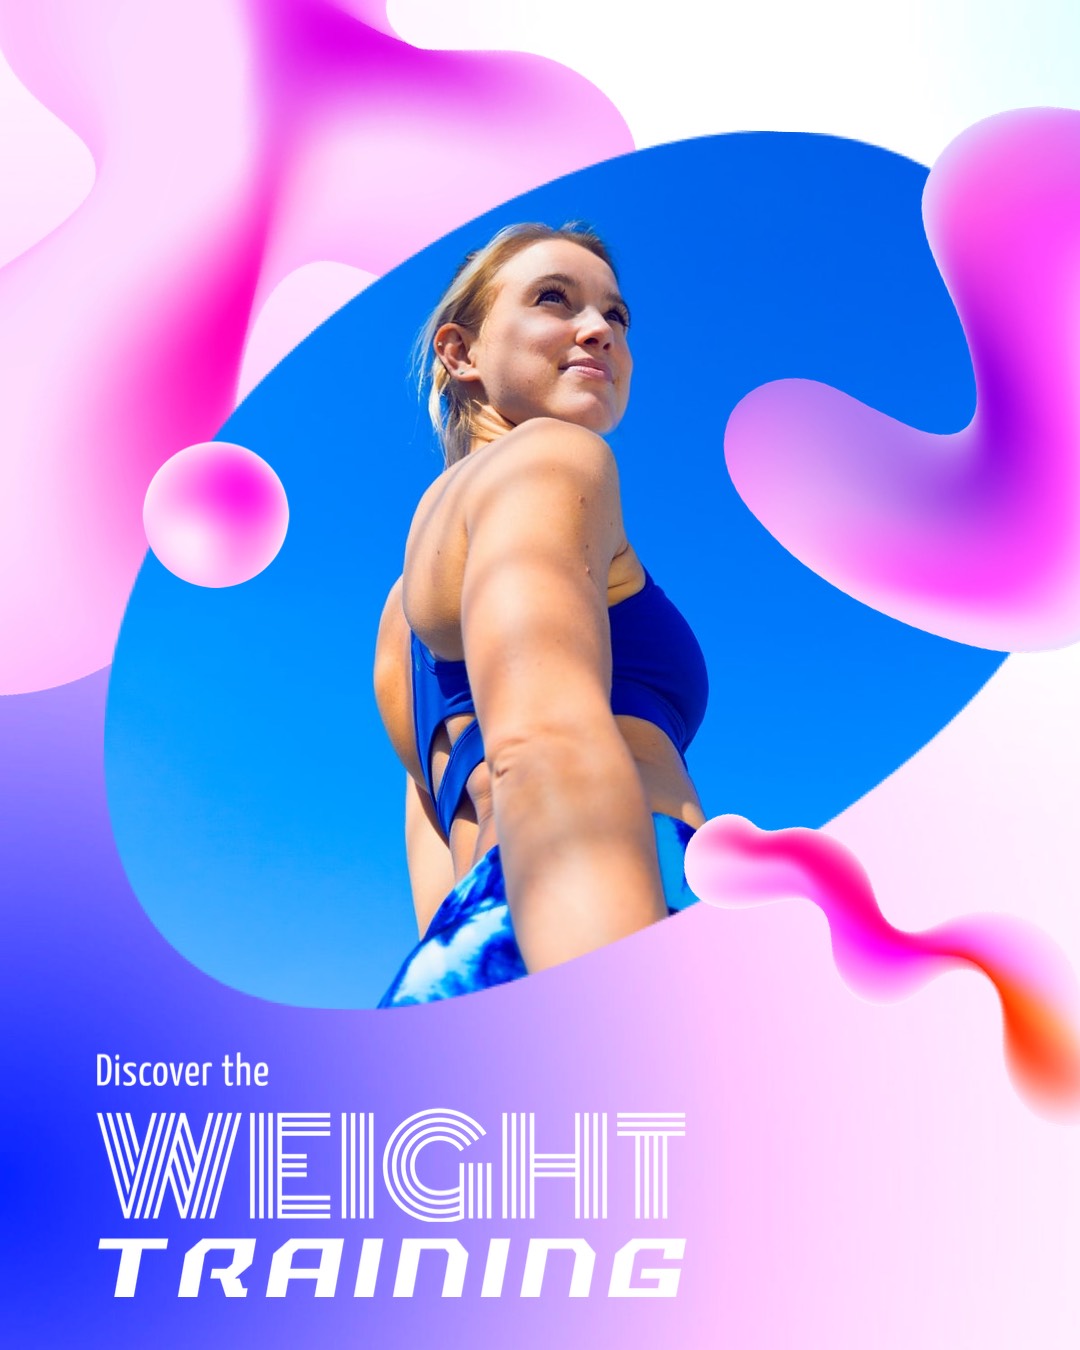 A Woman In A Bikini Standing In Front Of A Blue And Pink Background Sports Template